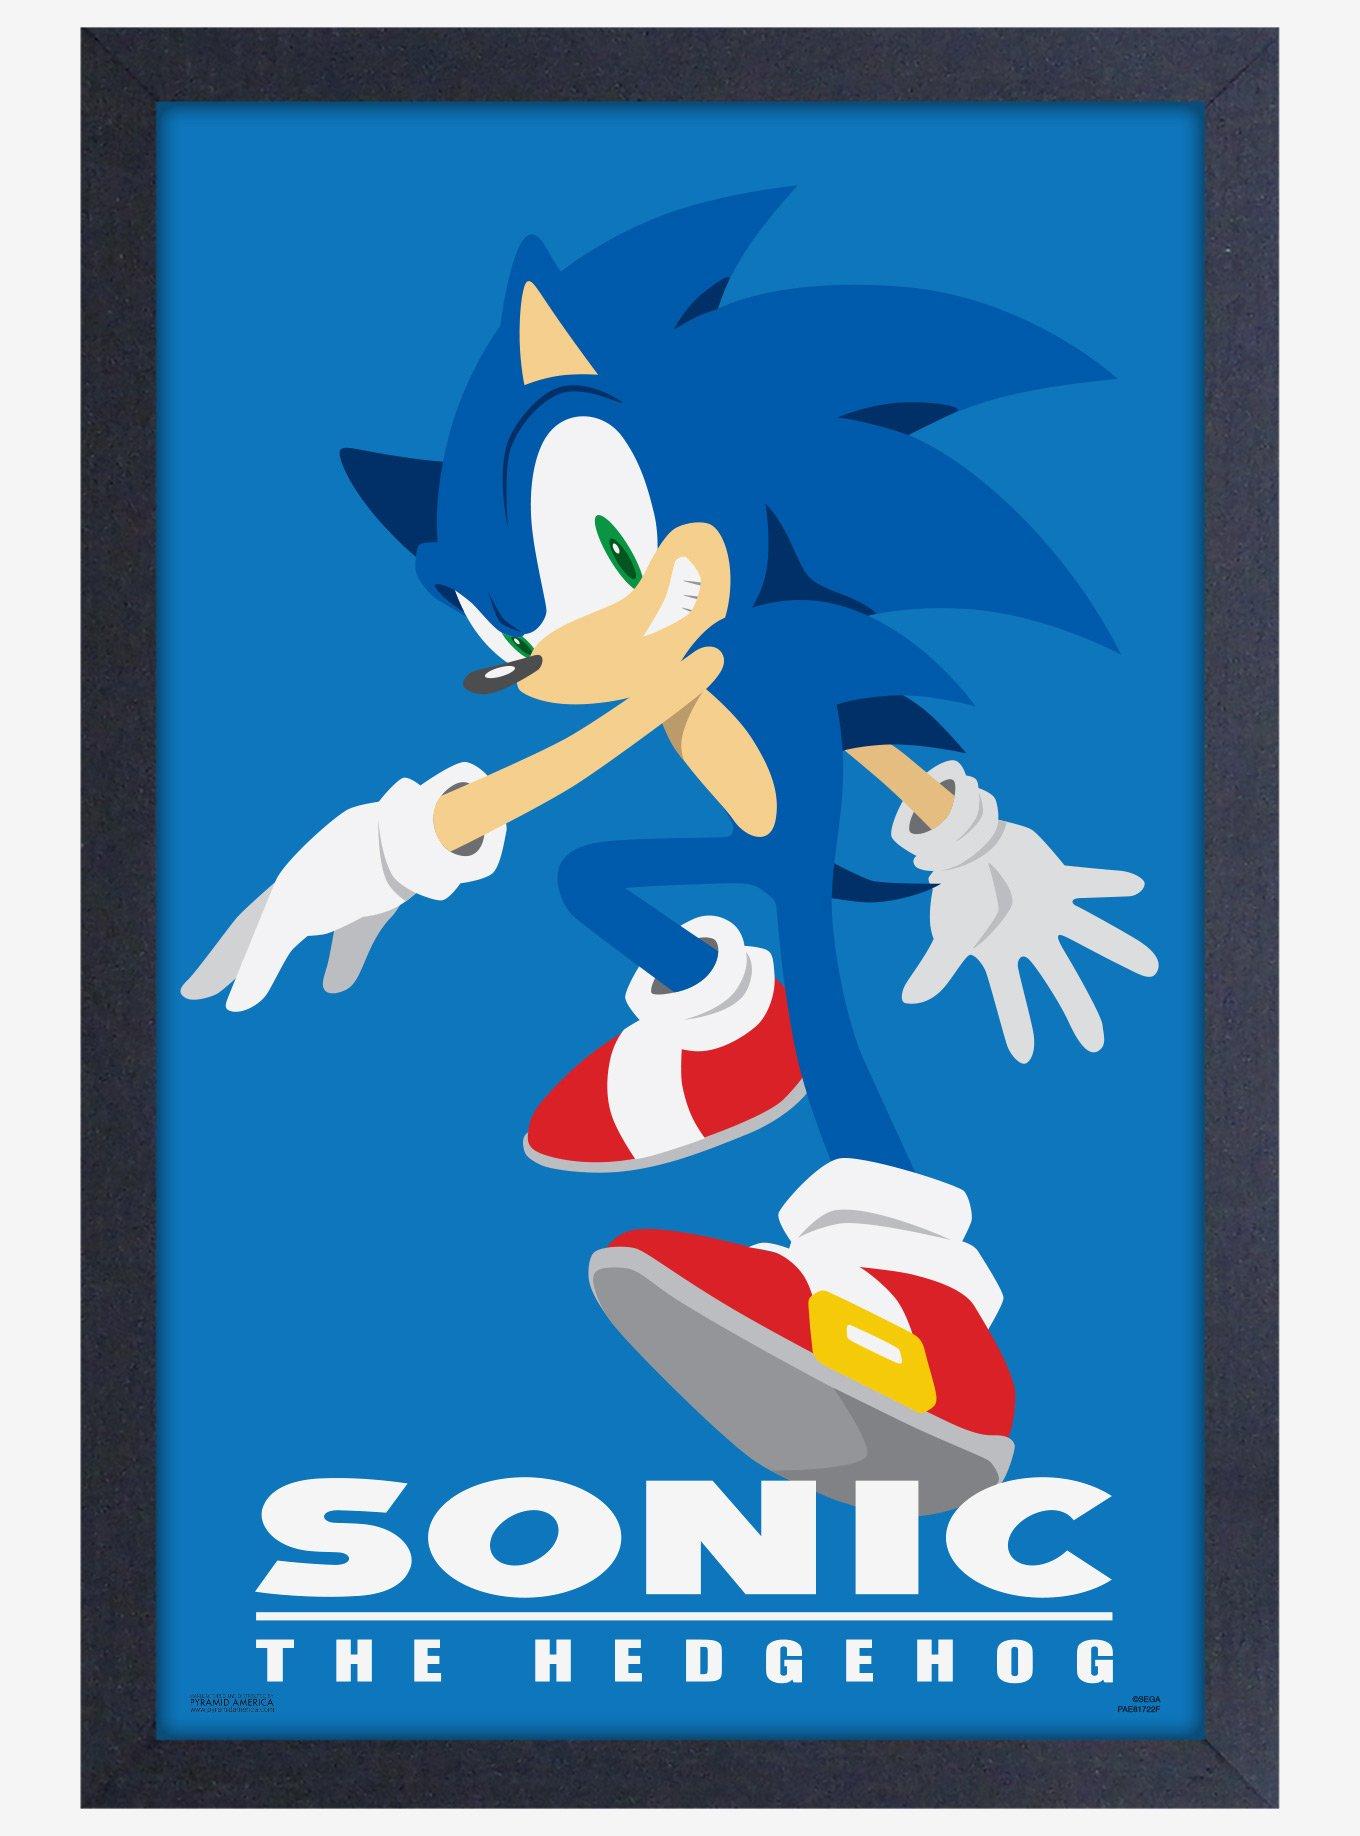 Sonic the Hedgehog - Sonic 1 - American Poster Art by